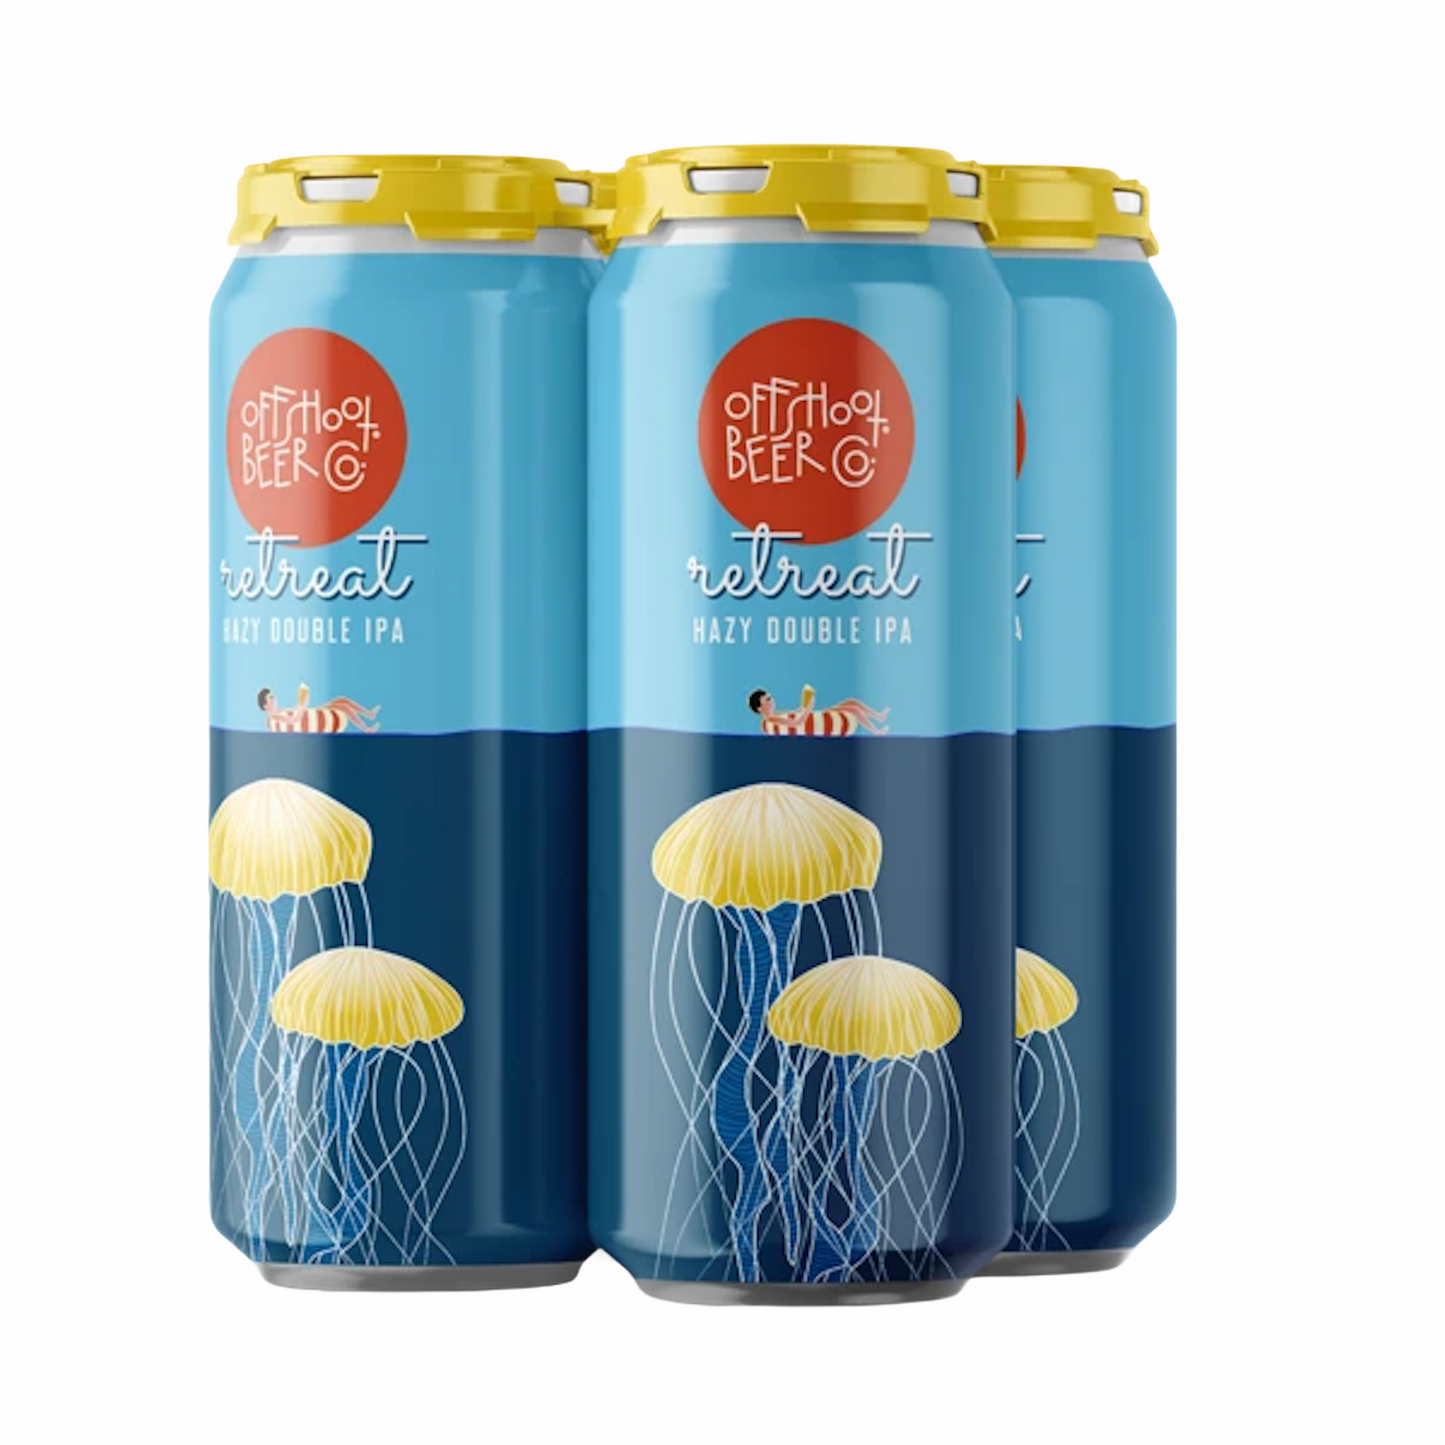 OFF SHOOT  RETREAT HAZY DOUBLE IPA 4 PACK CANS